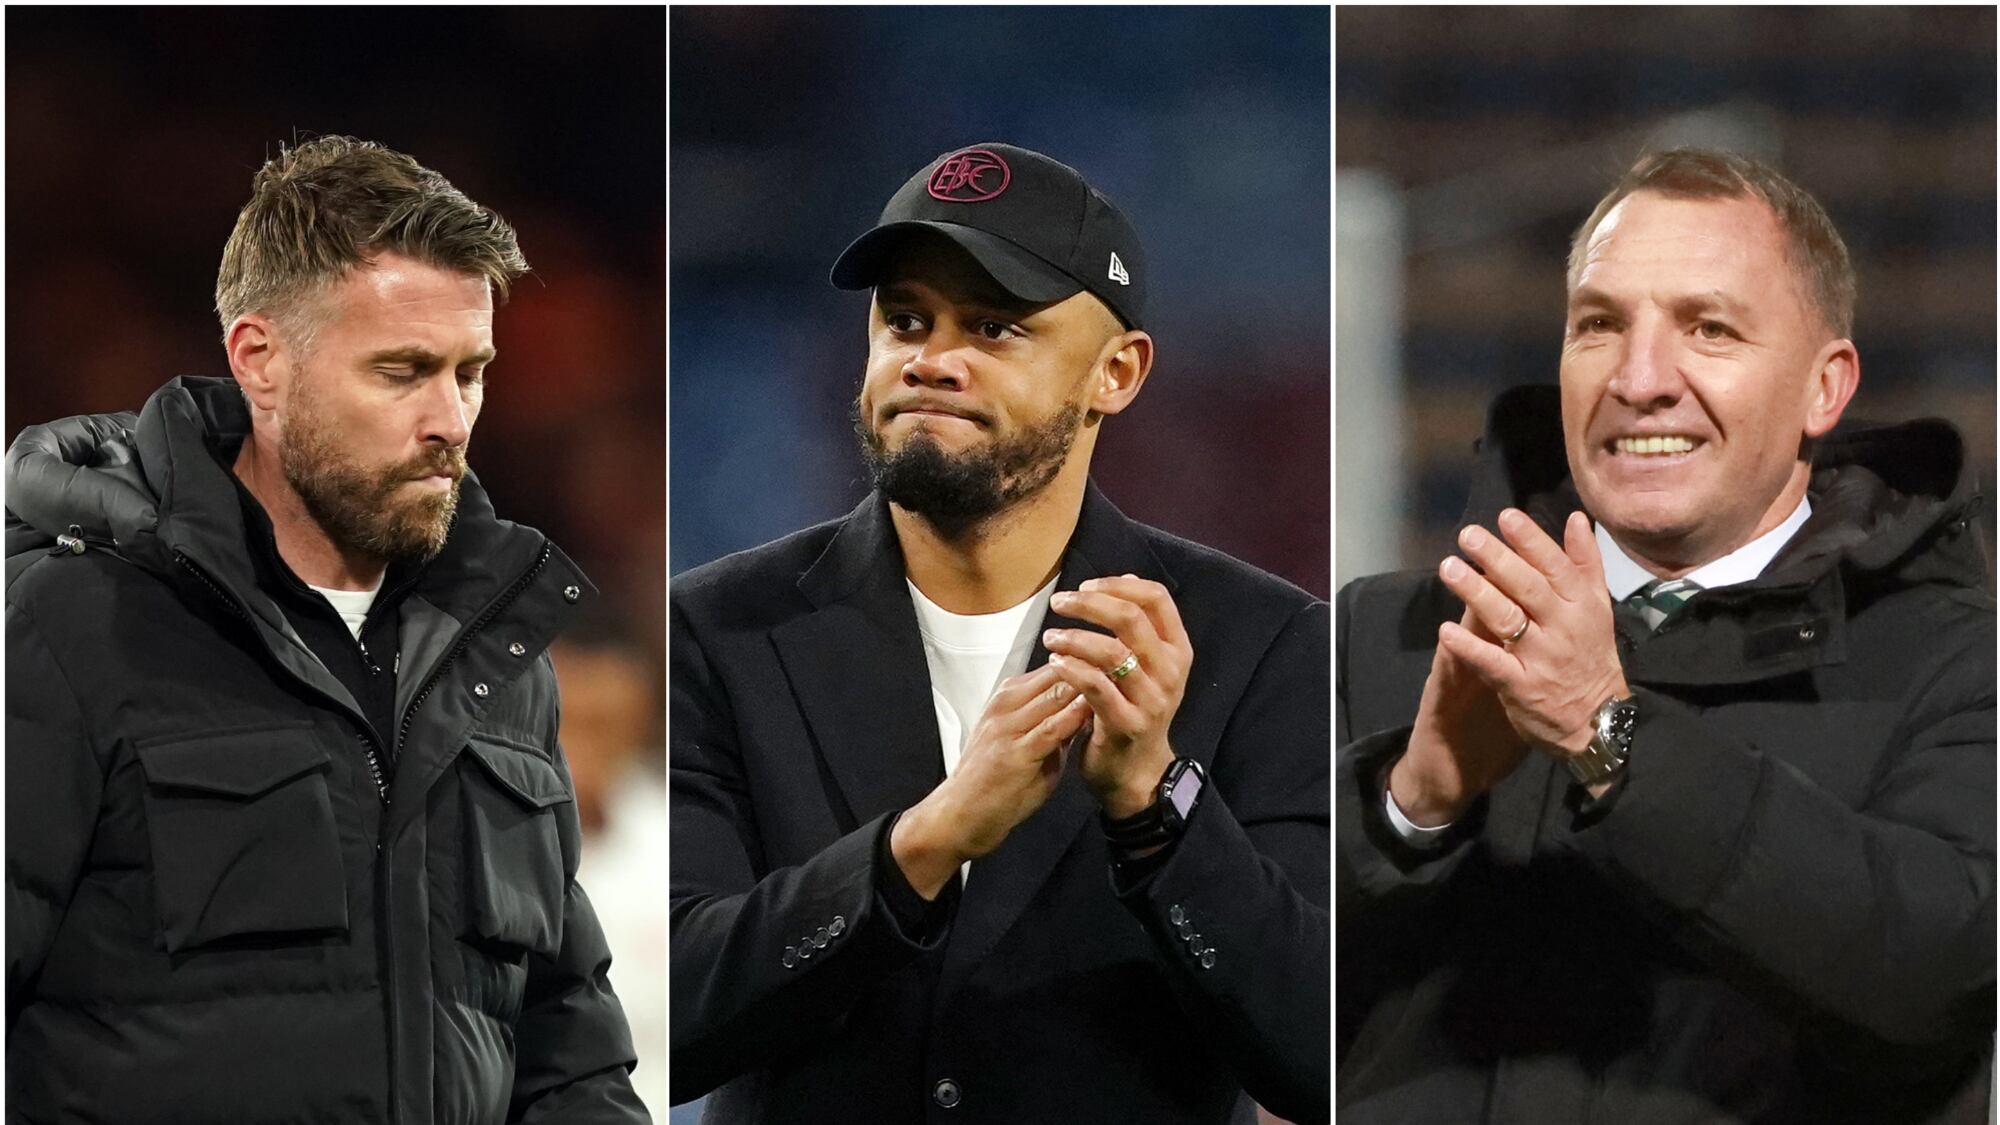 Rob Edwards, left, and Vincent Kompany are on the brink of relegation while Brendan Rodgers, right, and Celtic can strike a near-decisive blow in the title race